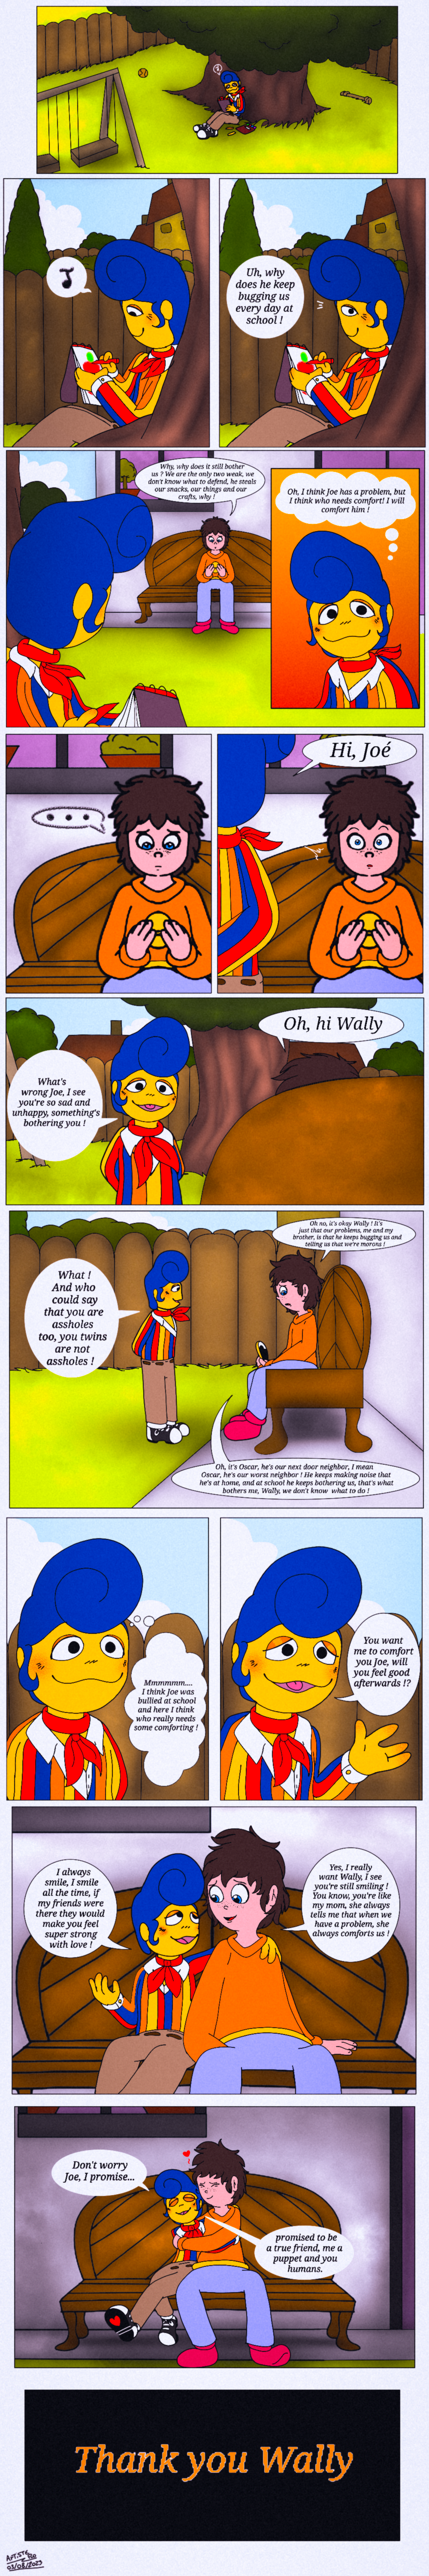 Hi! We are working on a translation of a fan comic by the FNaF